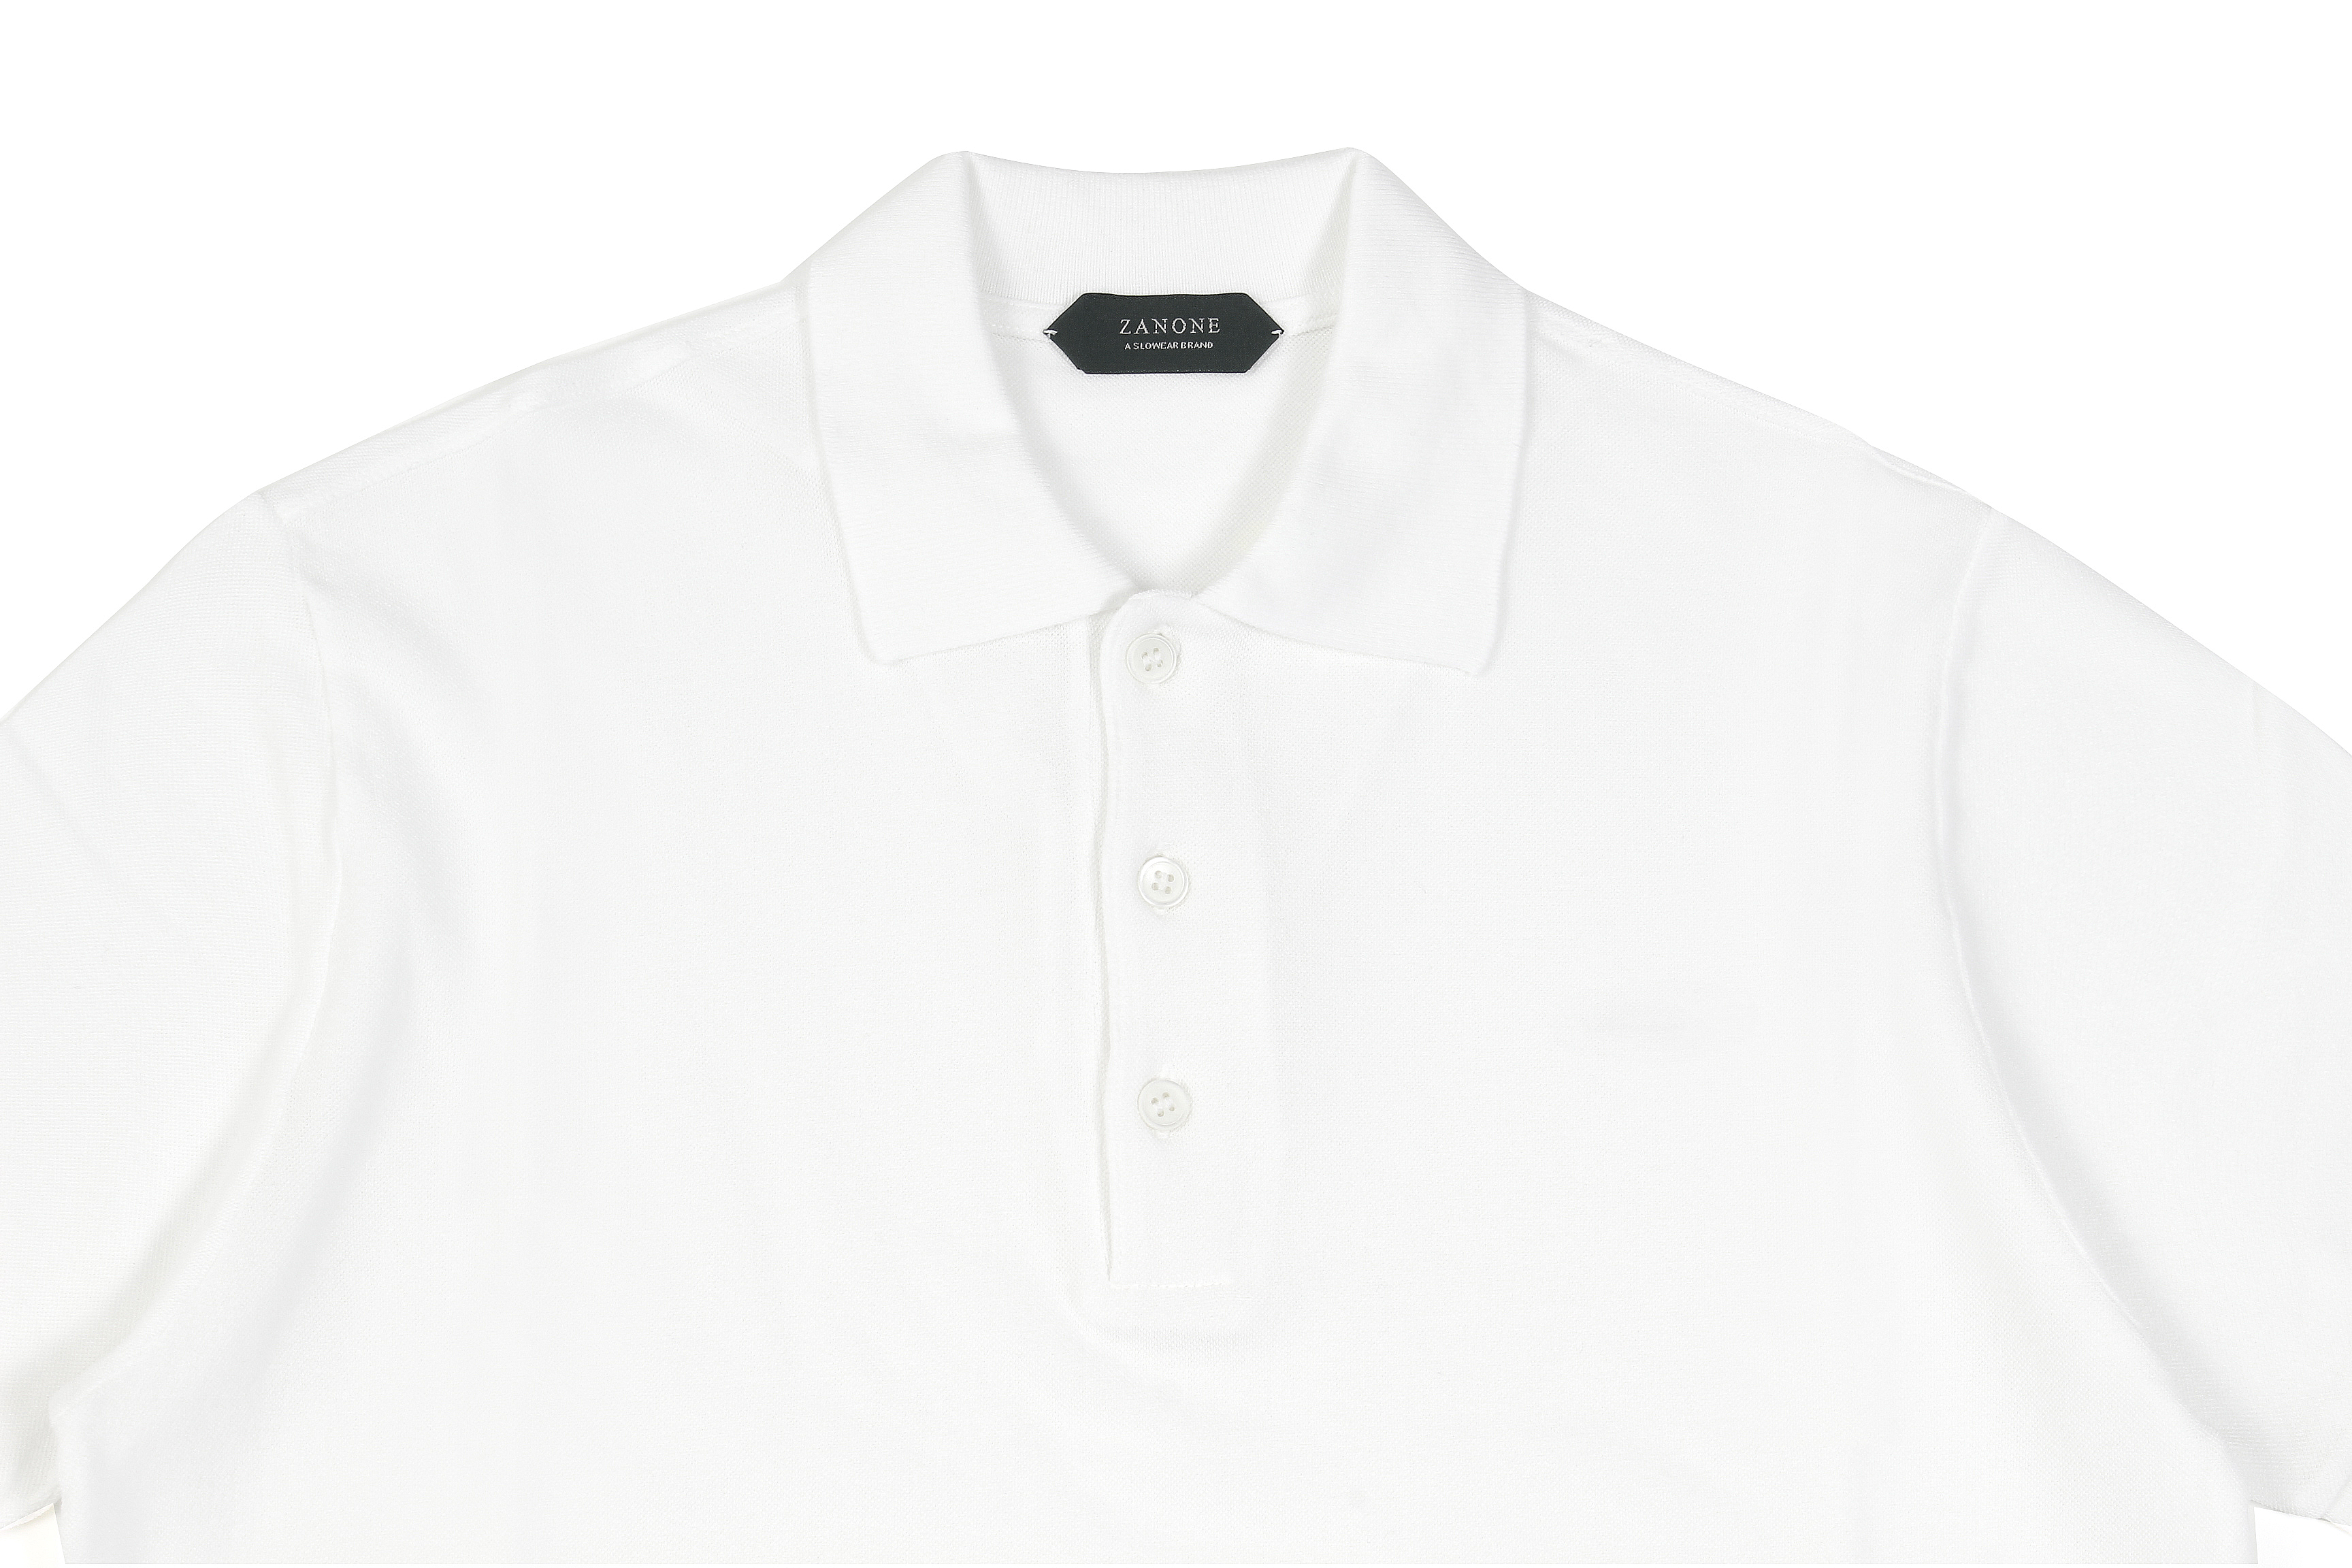 ZANONE(ザノーネ) Pique Polo Shirt ice cotton アイスコットン ピケポロシャツ WHITE (ホワイト・Z0001) made in italy (イタリア製) 2020 春夏新作 愛知 名古屋 altoediritto アルトエデリット ポロシャツ